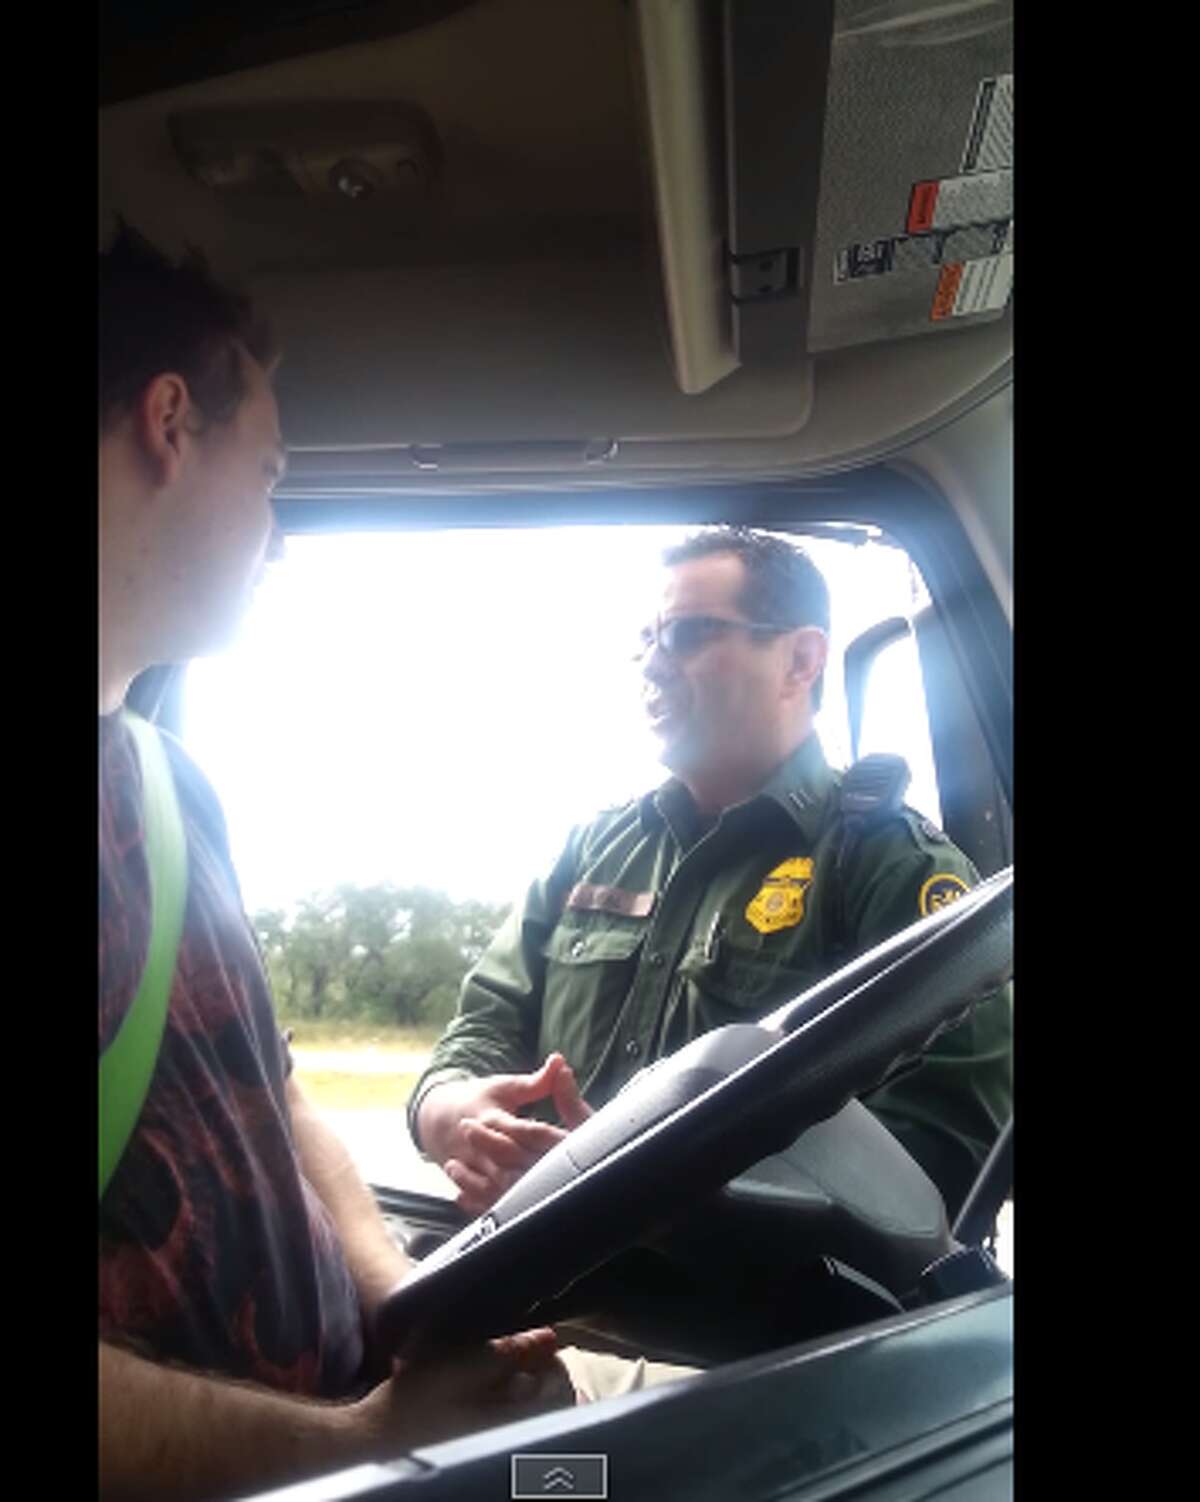 An American trucker clashed with the Border Patrol in South Texas as he refused to answer a question about his citizenship. An agent at a highway checkpoint near the town of Falfurrias asked if he was a U.S. citizen. The trucker said he did not have to answer the question as he had done nothing wrong.